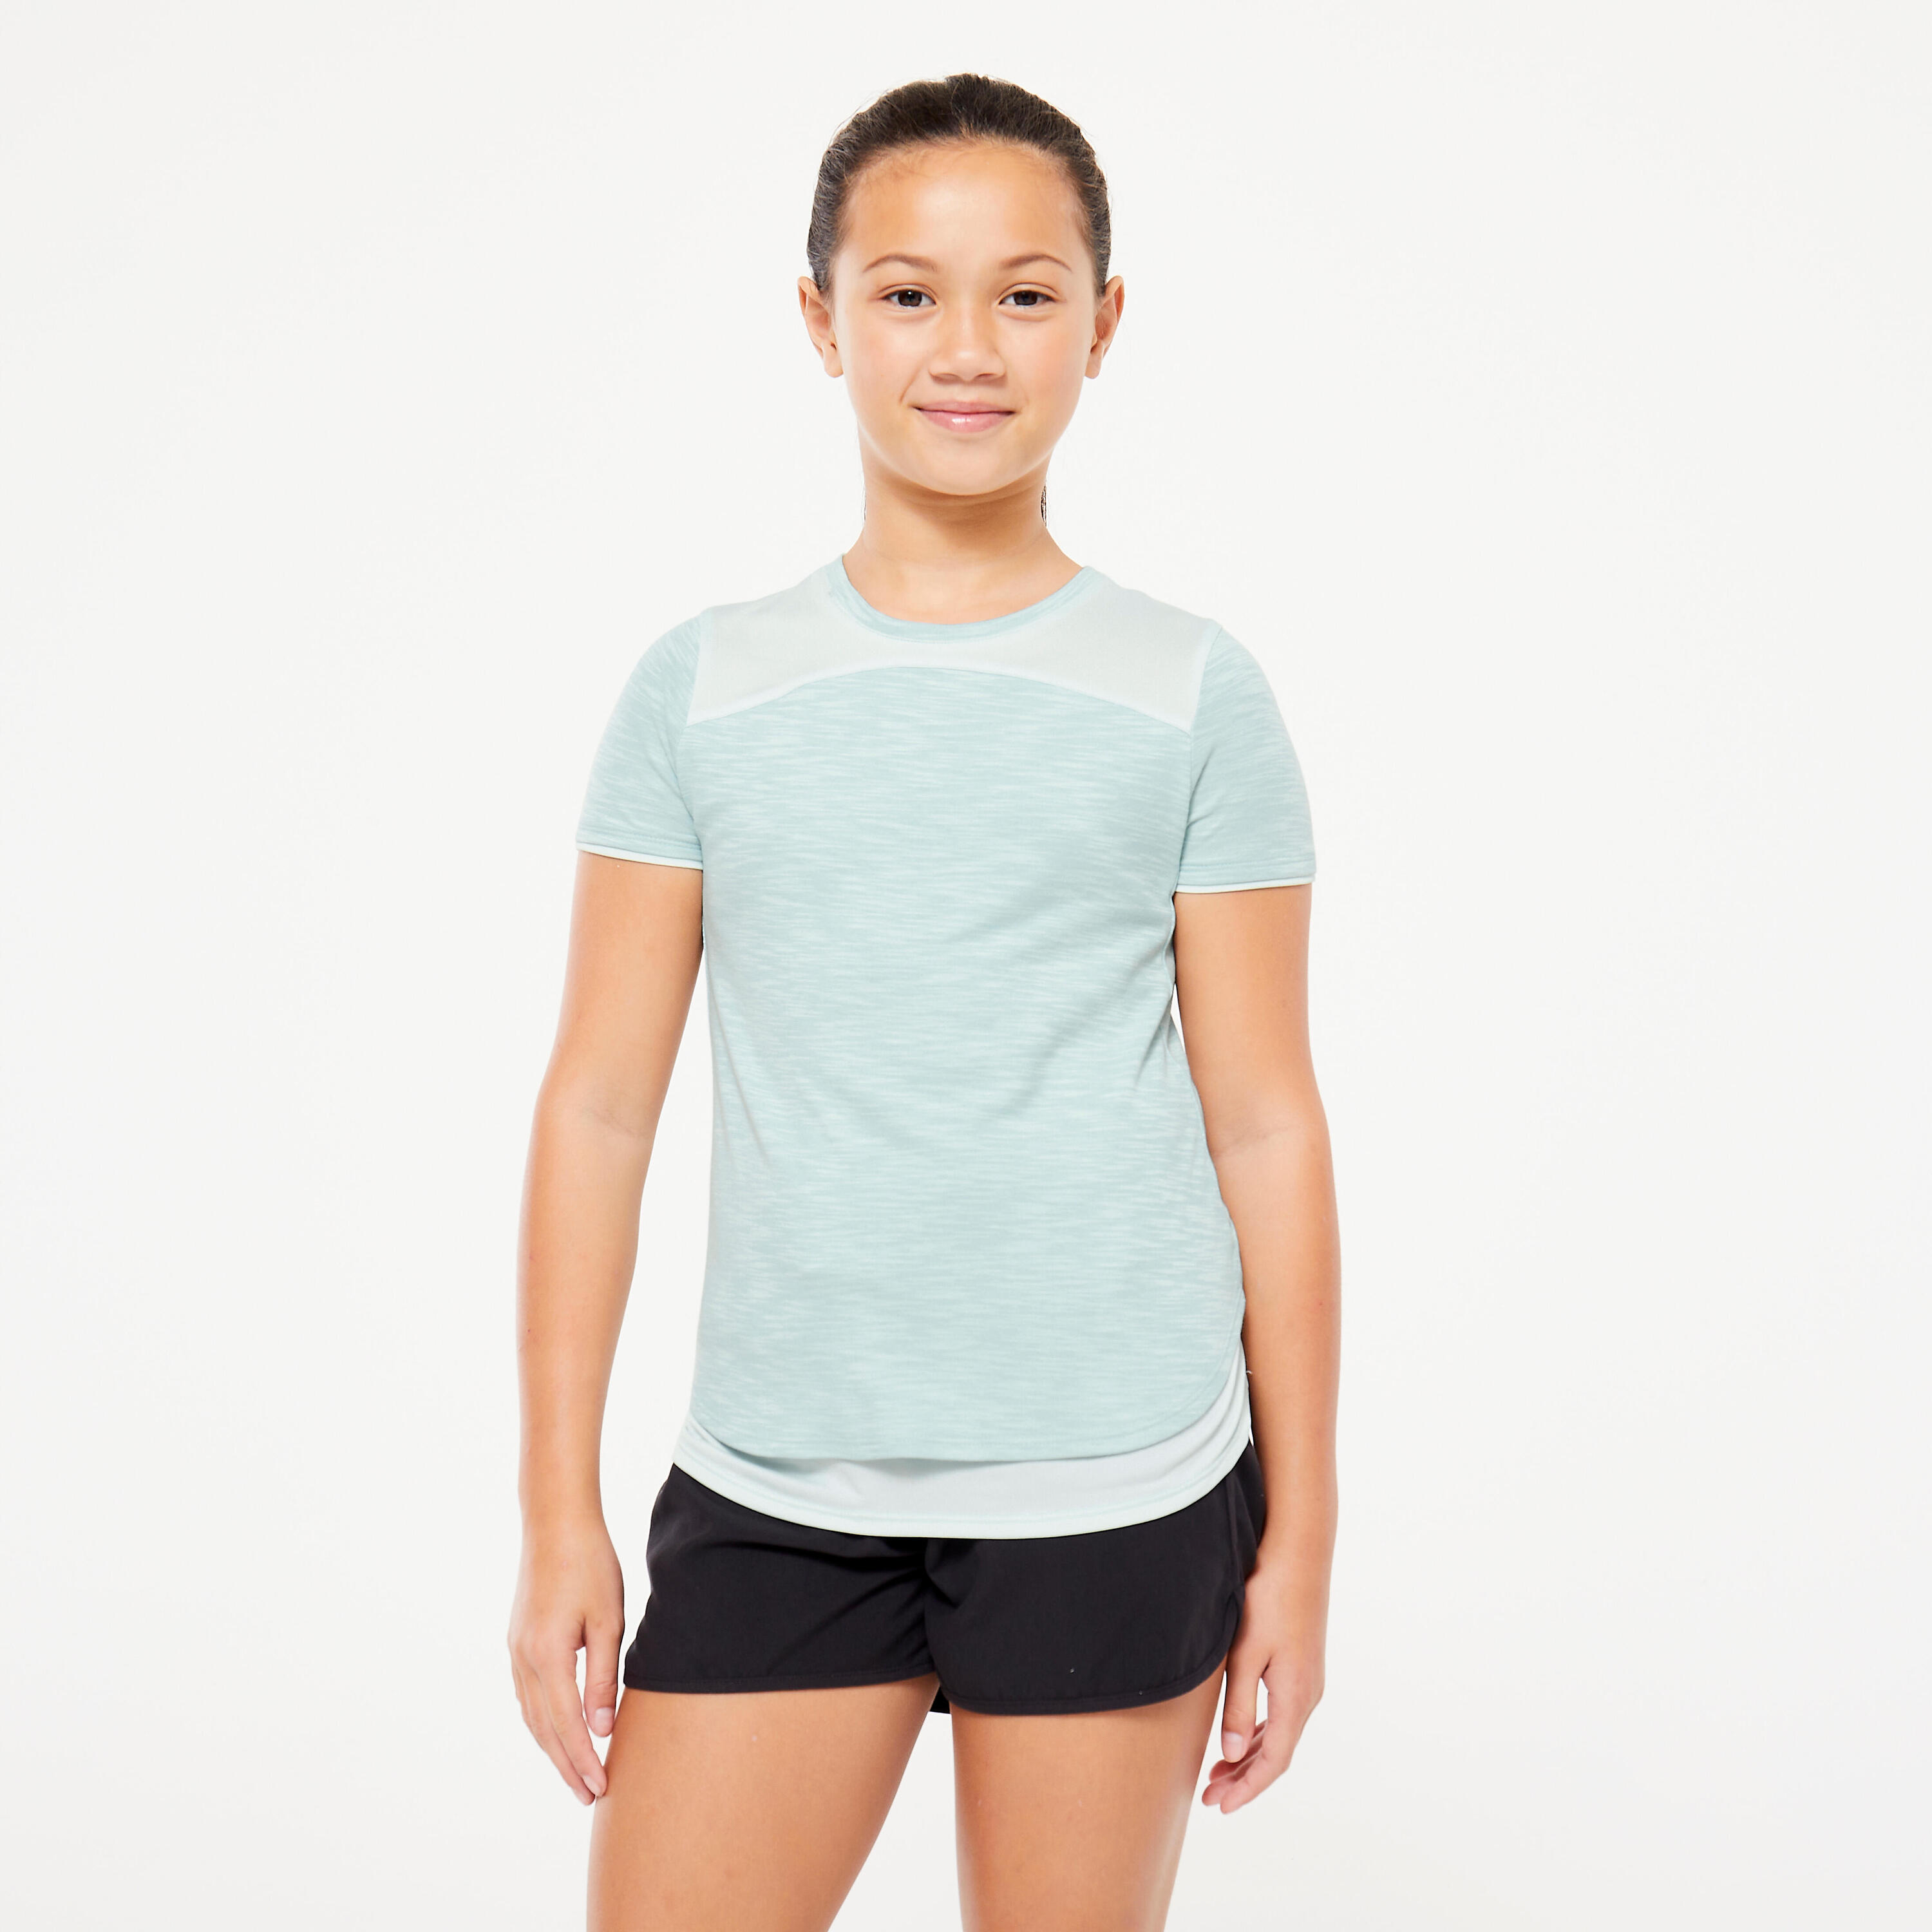 Girls' 2-in-1 T-Shirt - Turquoise 1/6